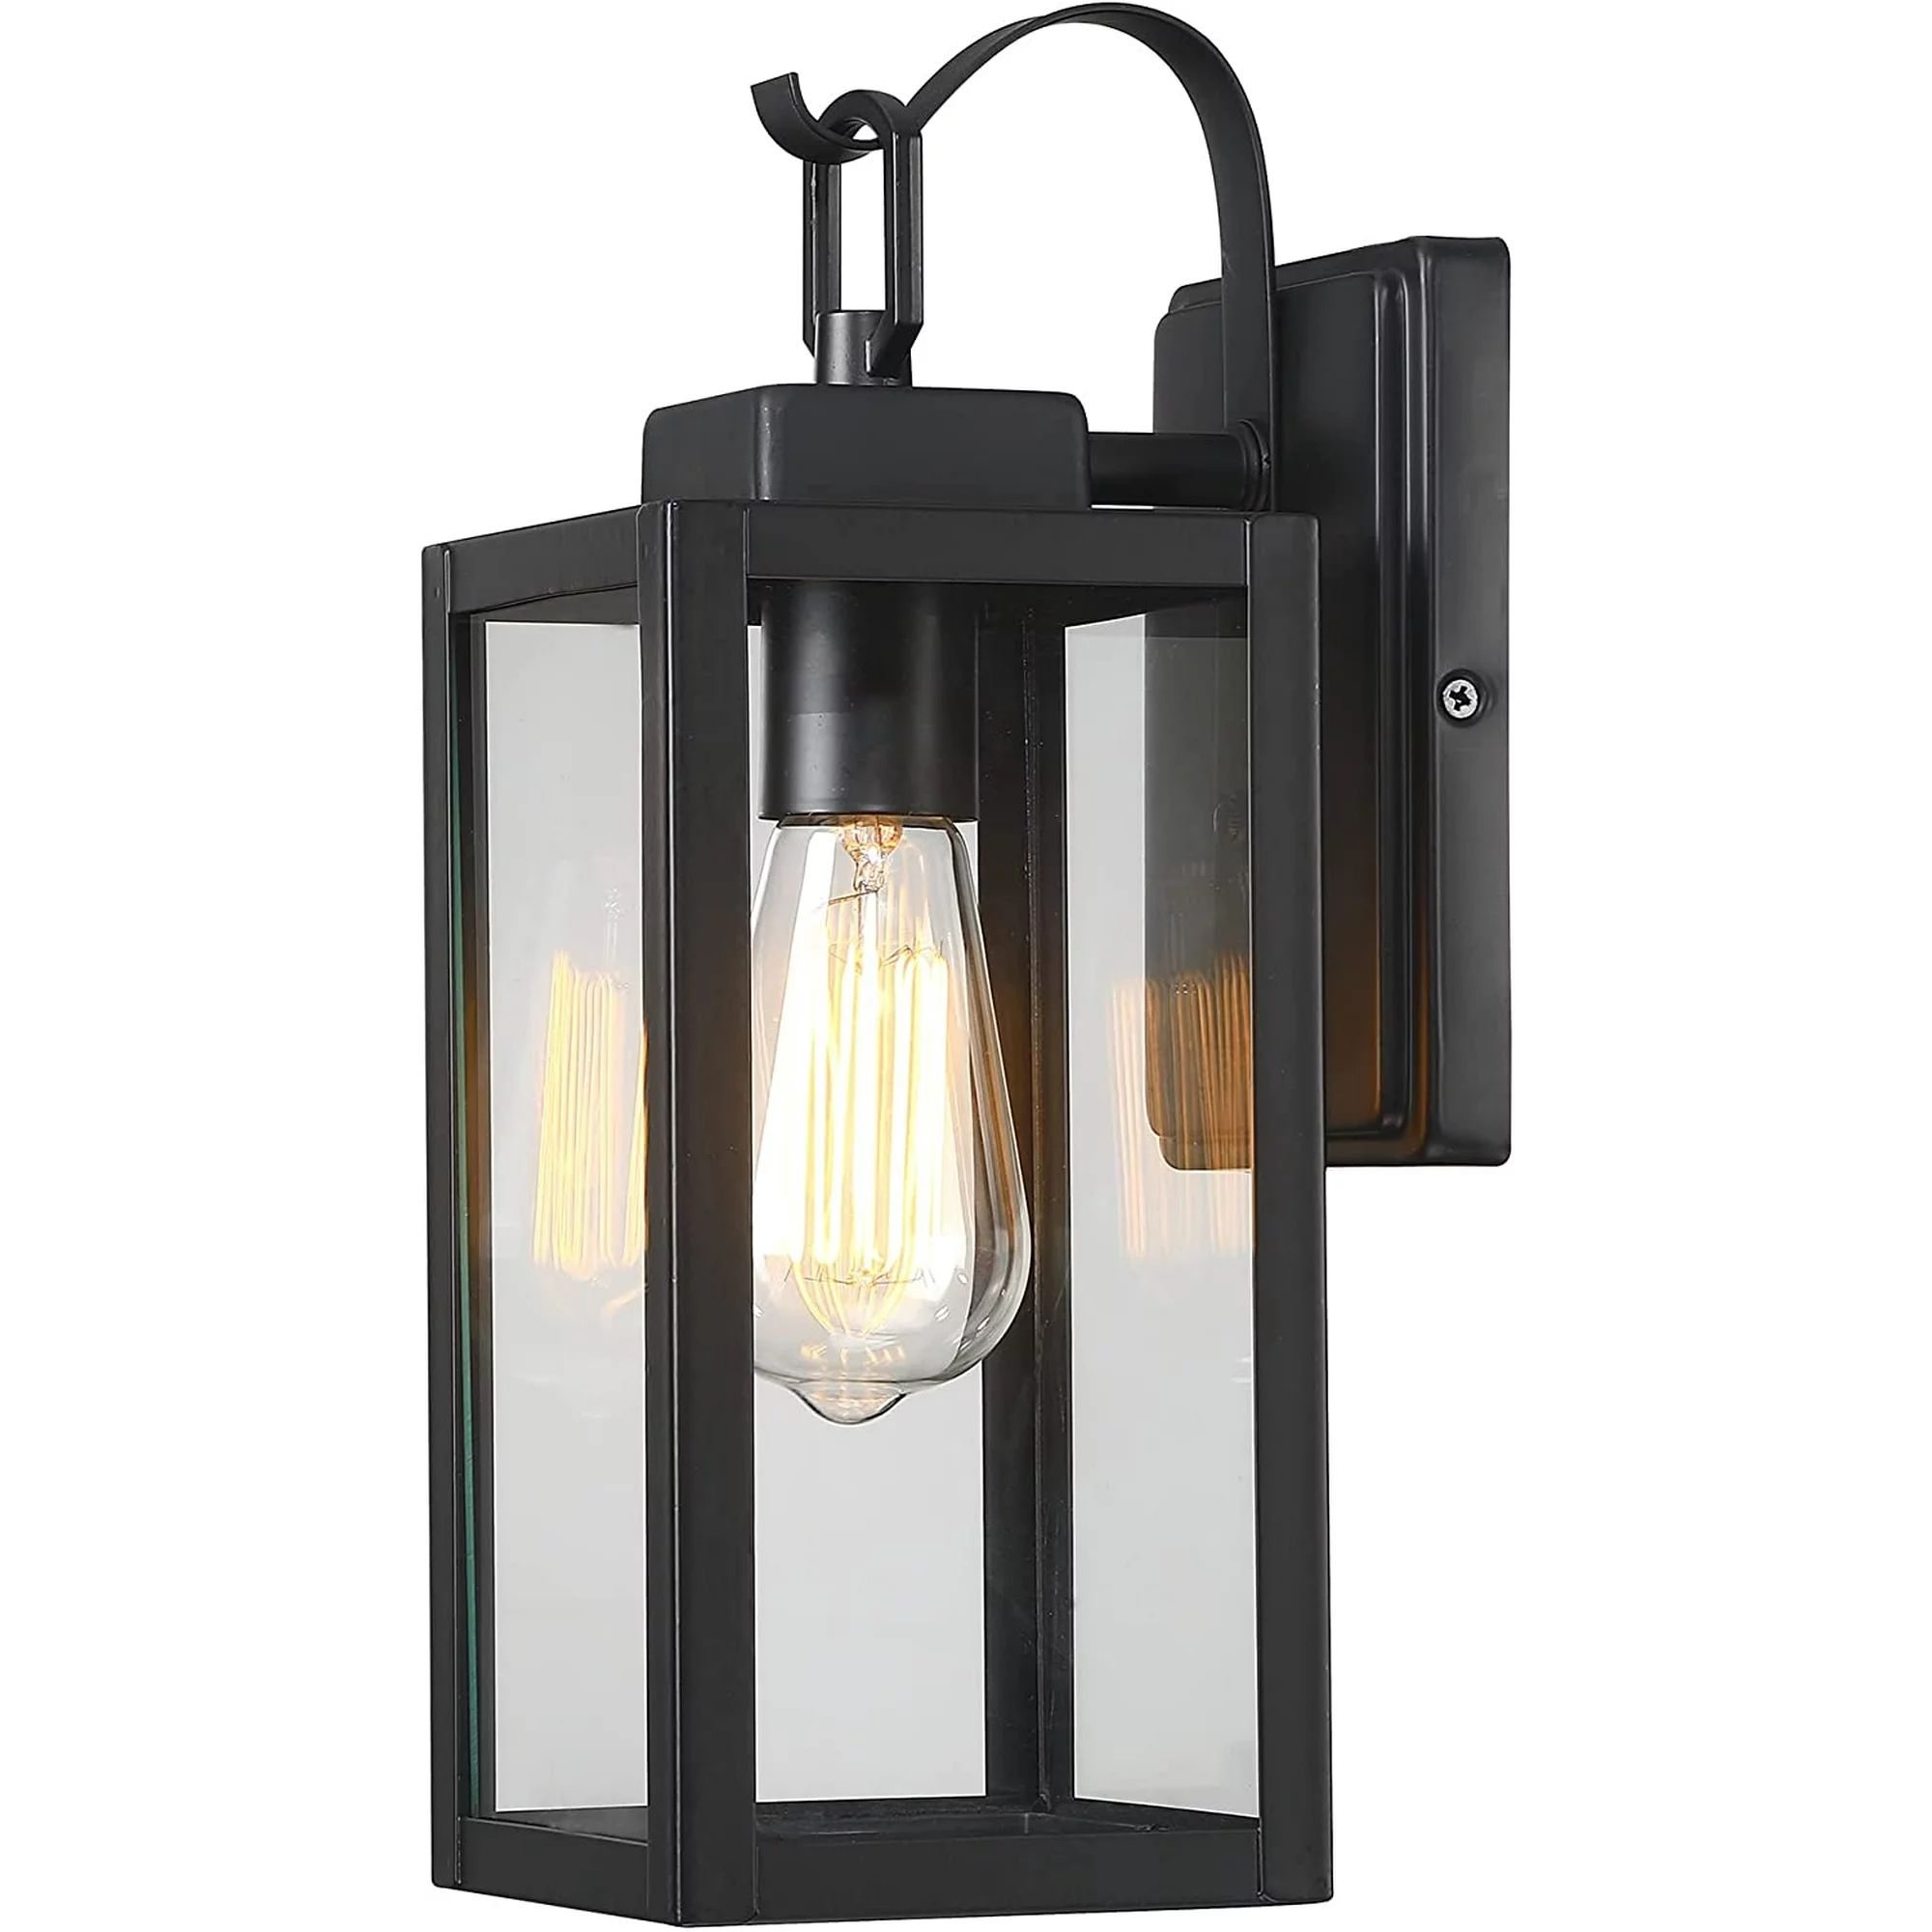 UIXE Black Wall Sconce Light, Exterior Wall Mount Fixtures w/Clear Glass for Garages Porch | Walmart (US)